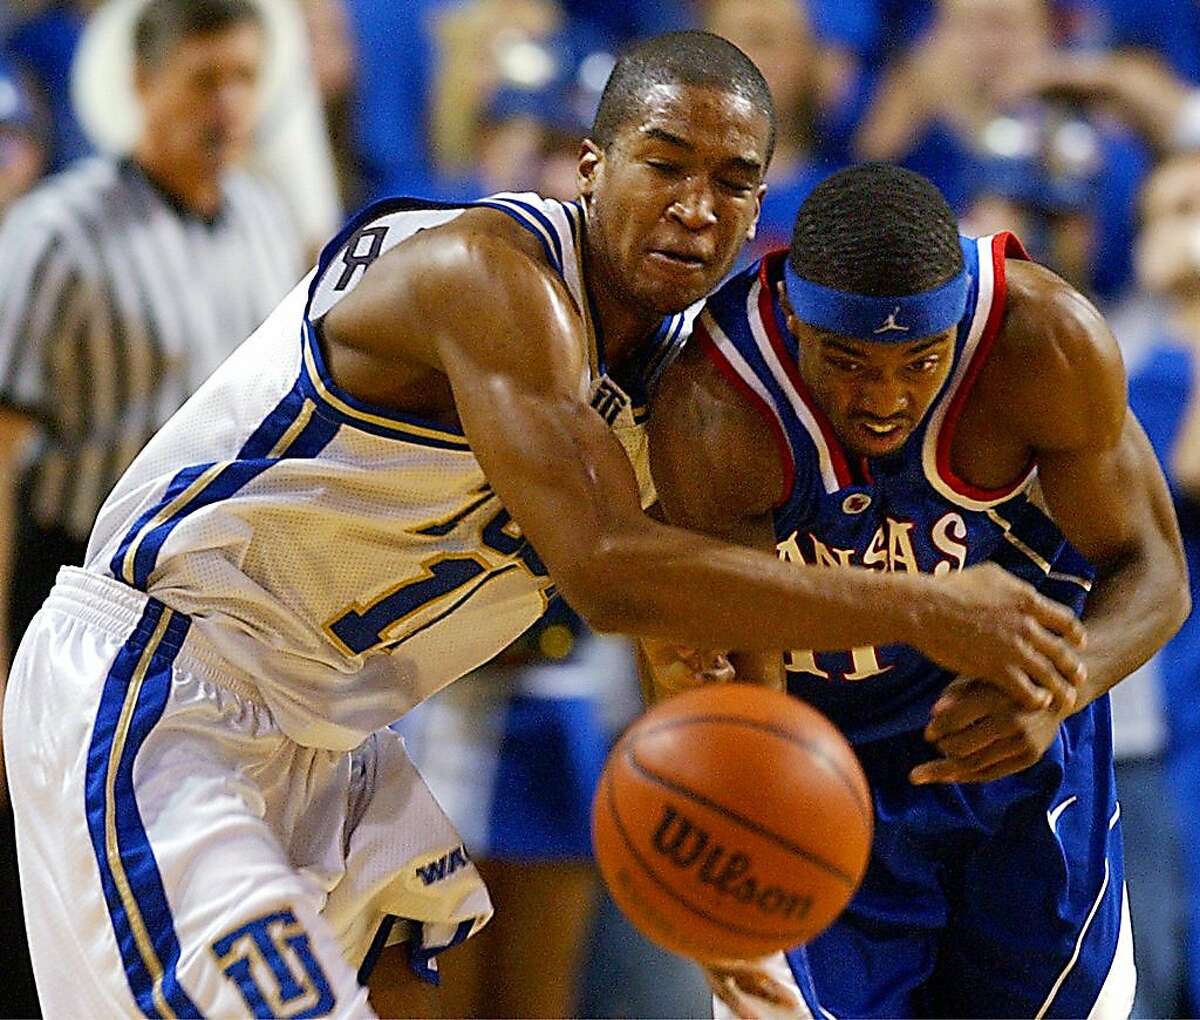 Tulsa's Jason Parker, left, fights for the ball with Kansas' Aaron Miles during the first half Wednesday, Dec. 11, 2002, in Tulsa, Okla. (AP Photo/Tulsa World, Stephen Pingry)